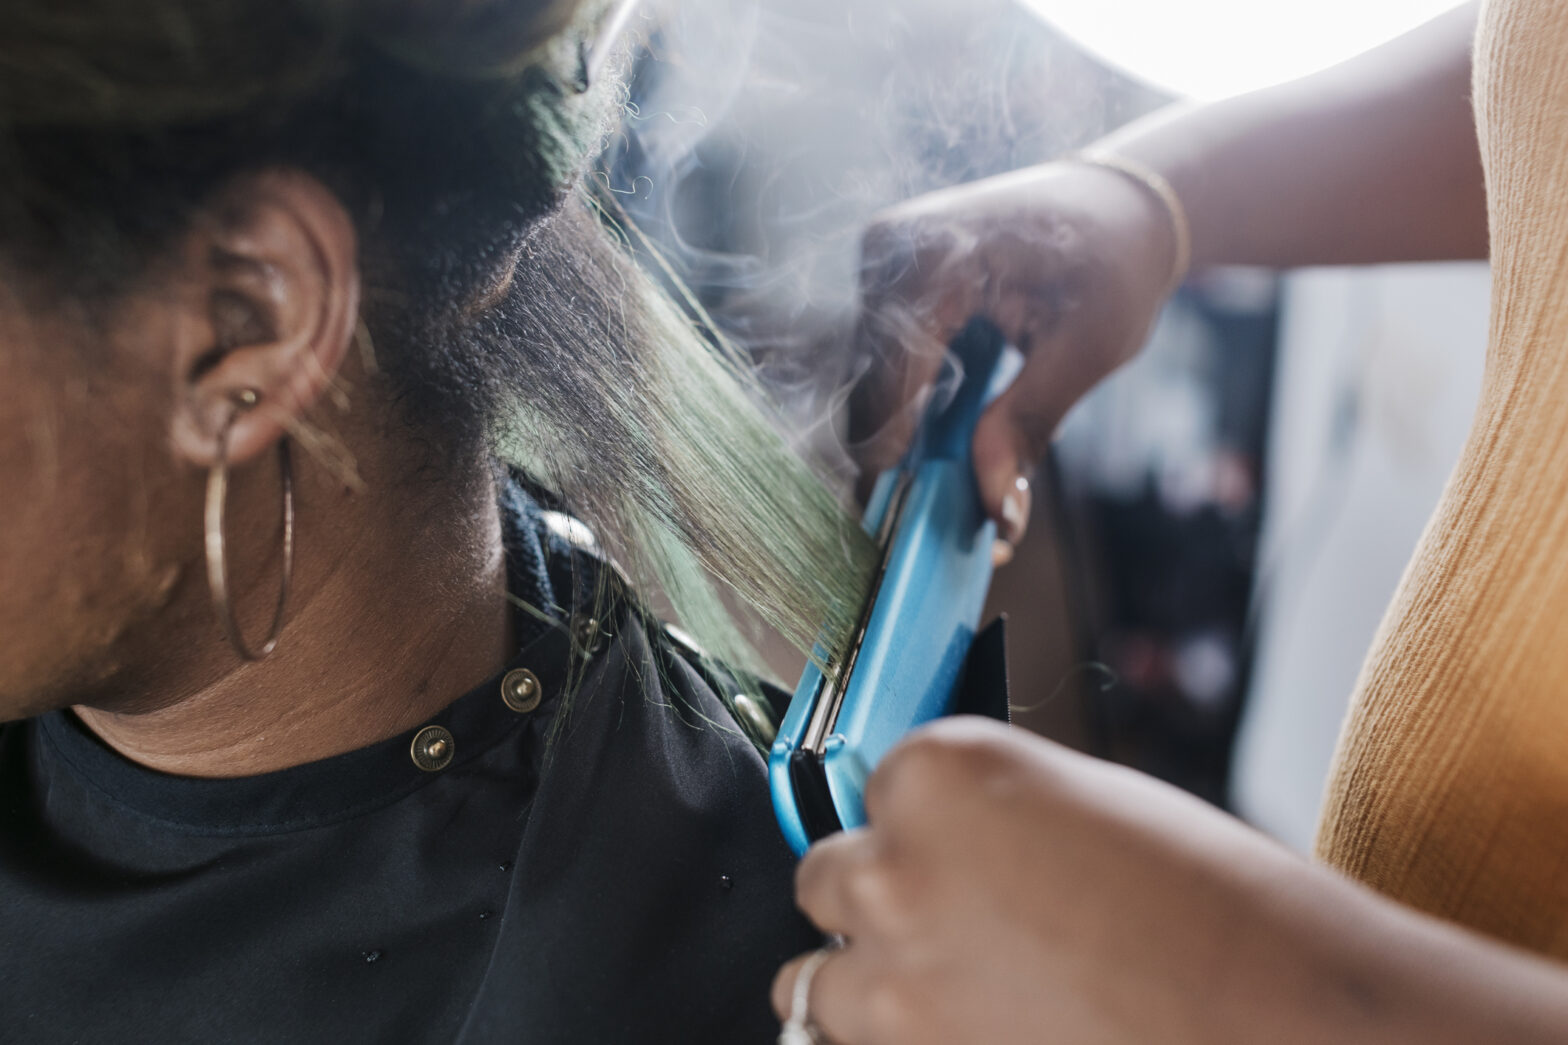 A close up of a black hairdresser straightening a client's hair with some steam rising from the heat.